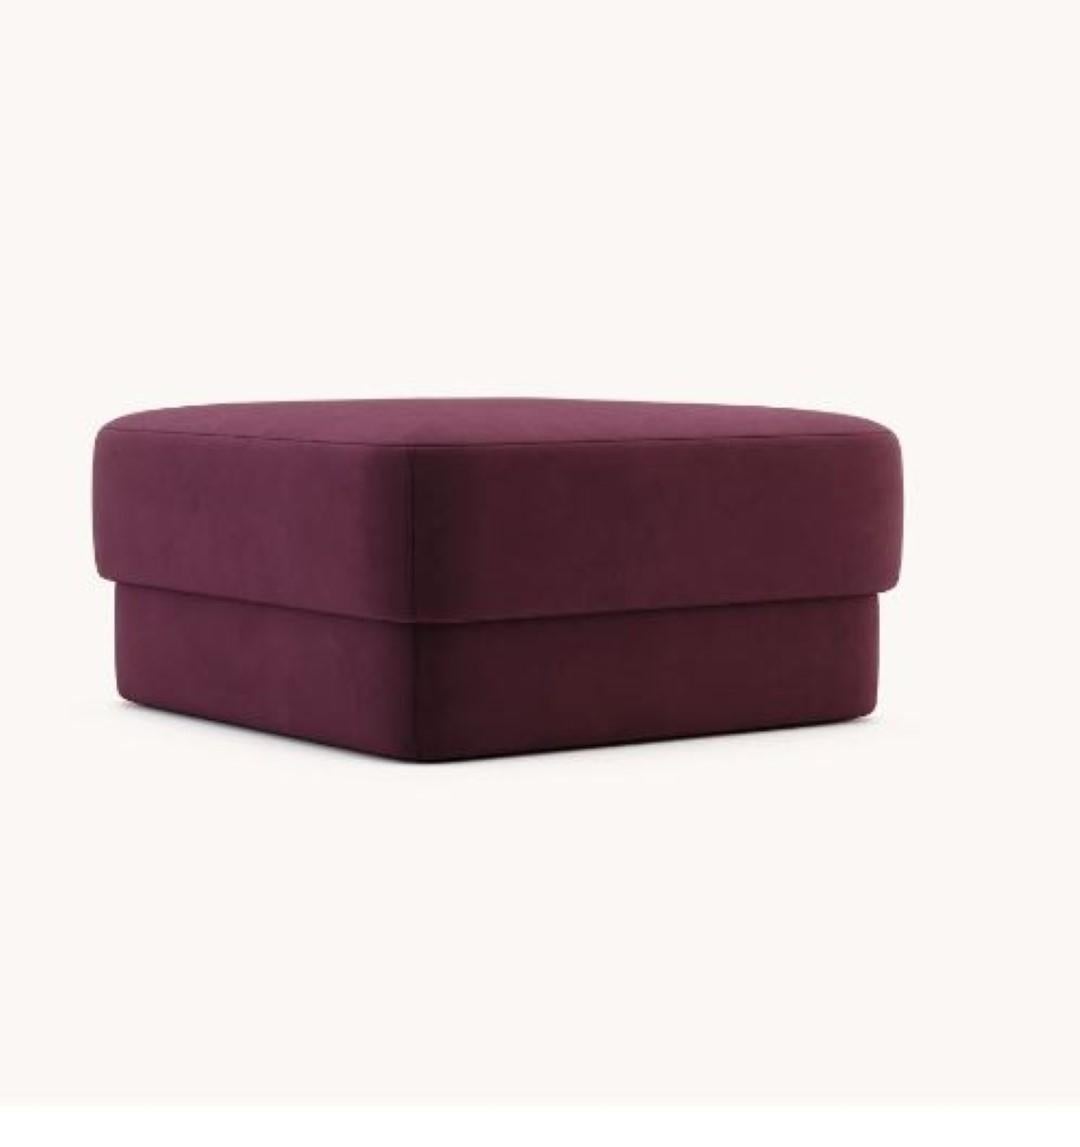 Kate L Pouf by Domkapa
Materials: Velvet, upholstery.
Dimensions: W 90 x D 90 x H 45 cm. 
Also available in different materials. Please contact us.

Fully upholstered, Kate pouf is the ultimate comfortable experience to be added to any project.